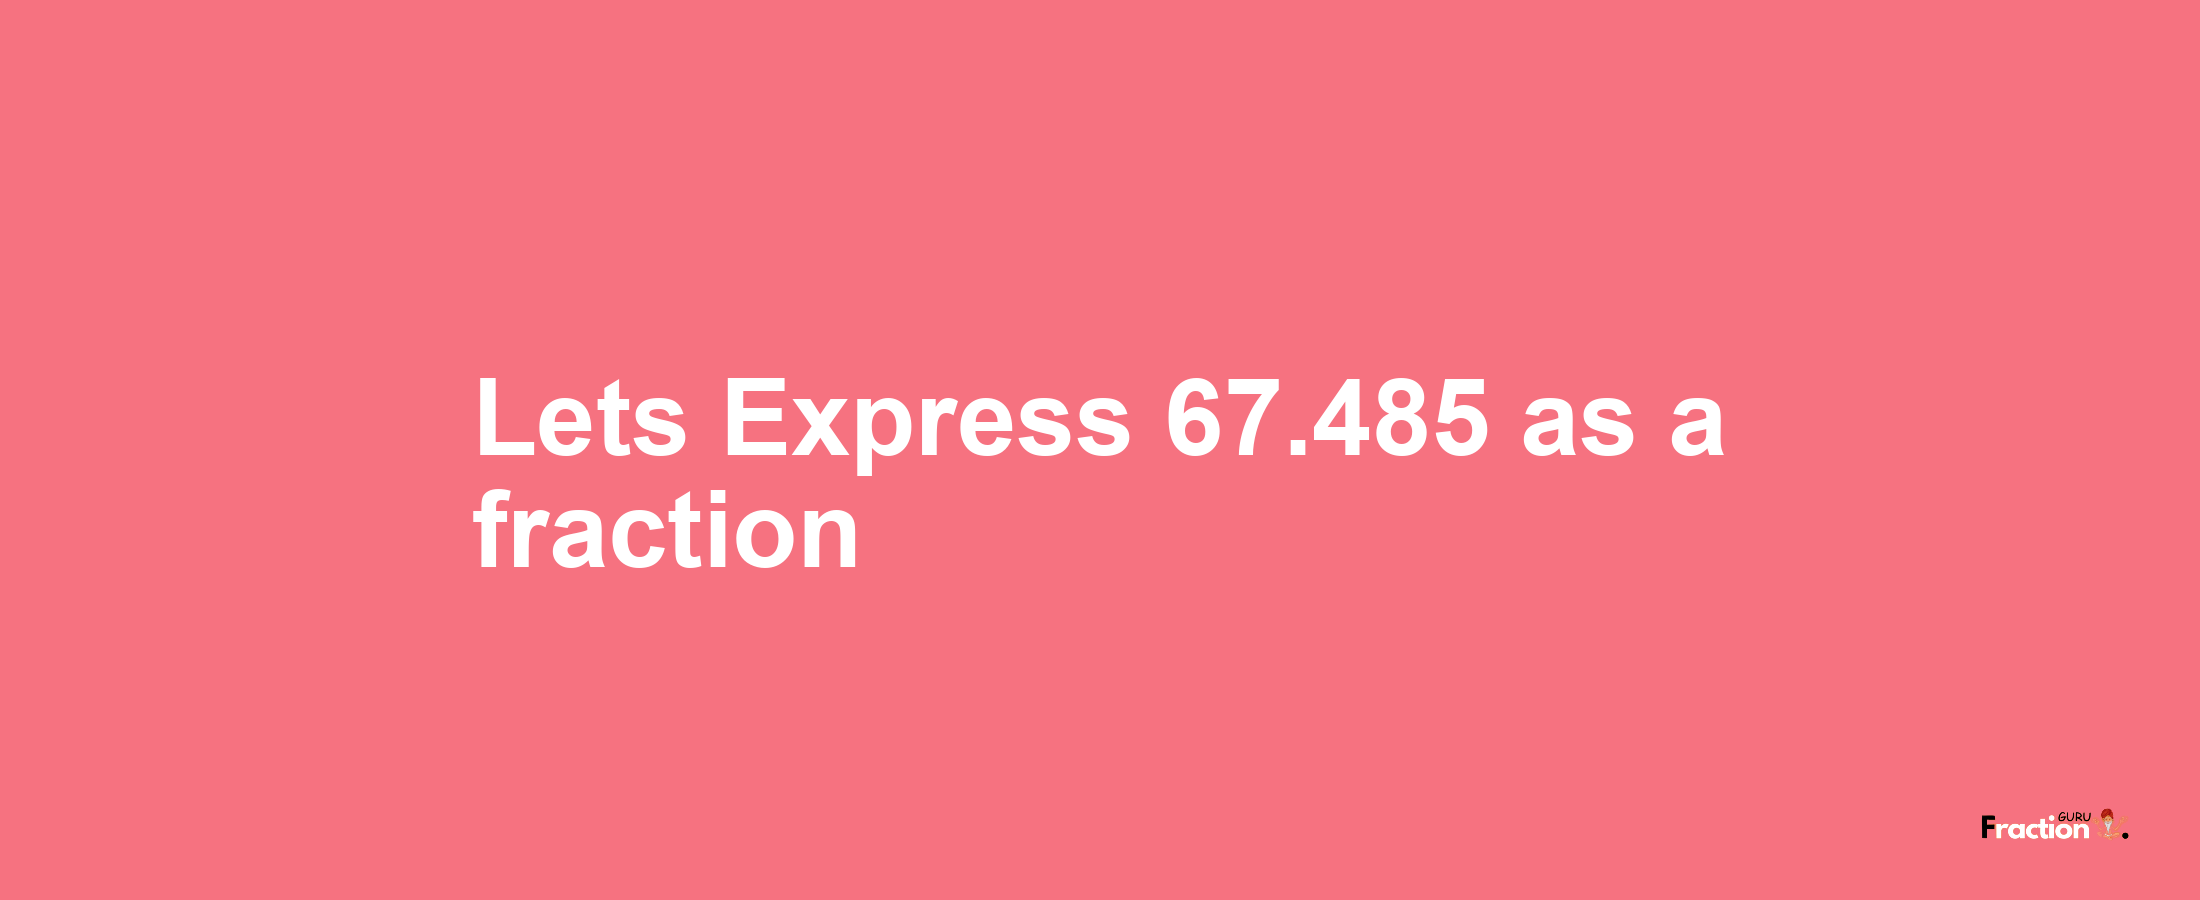 Lets Express 67.485 as afraction